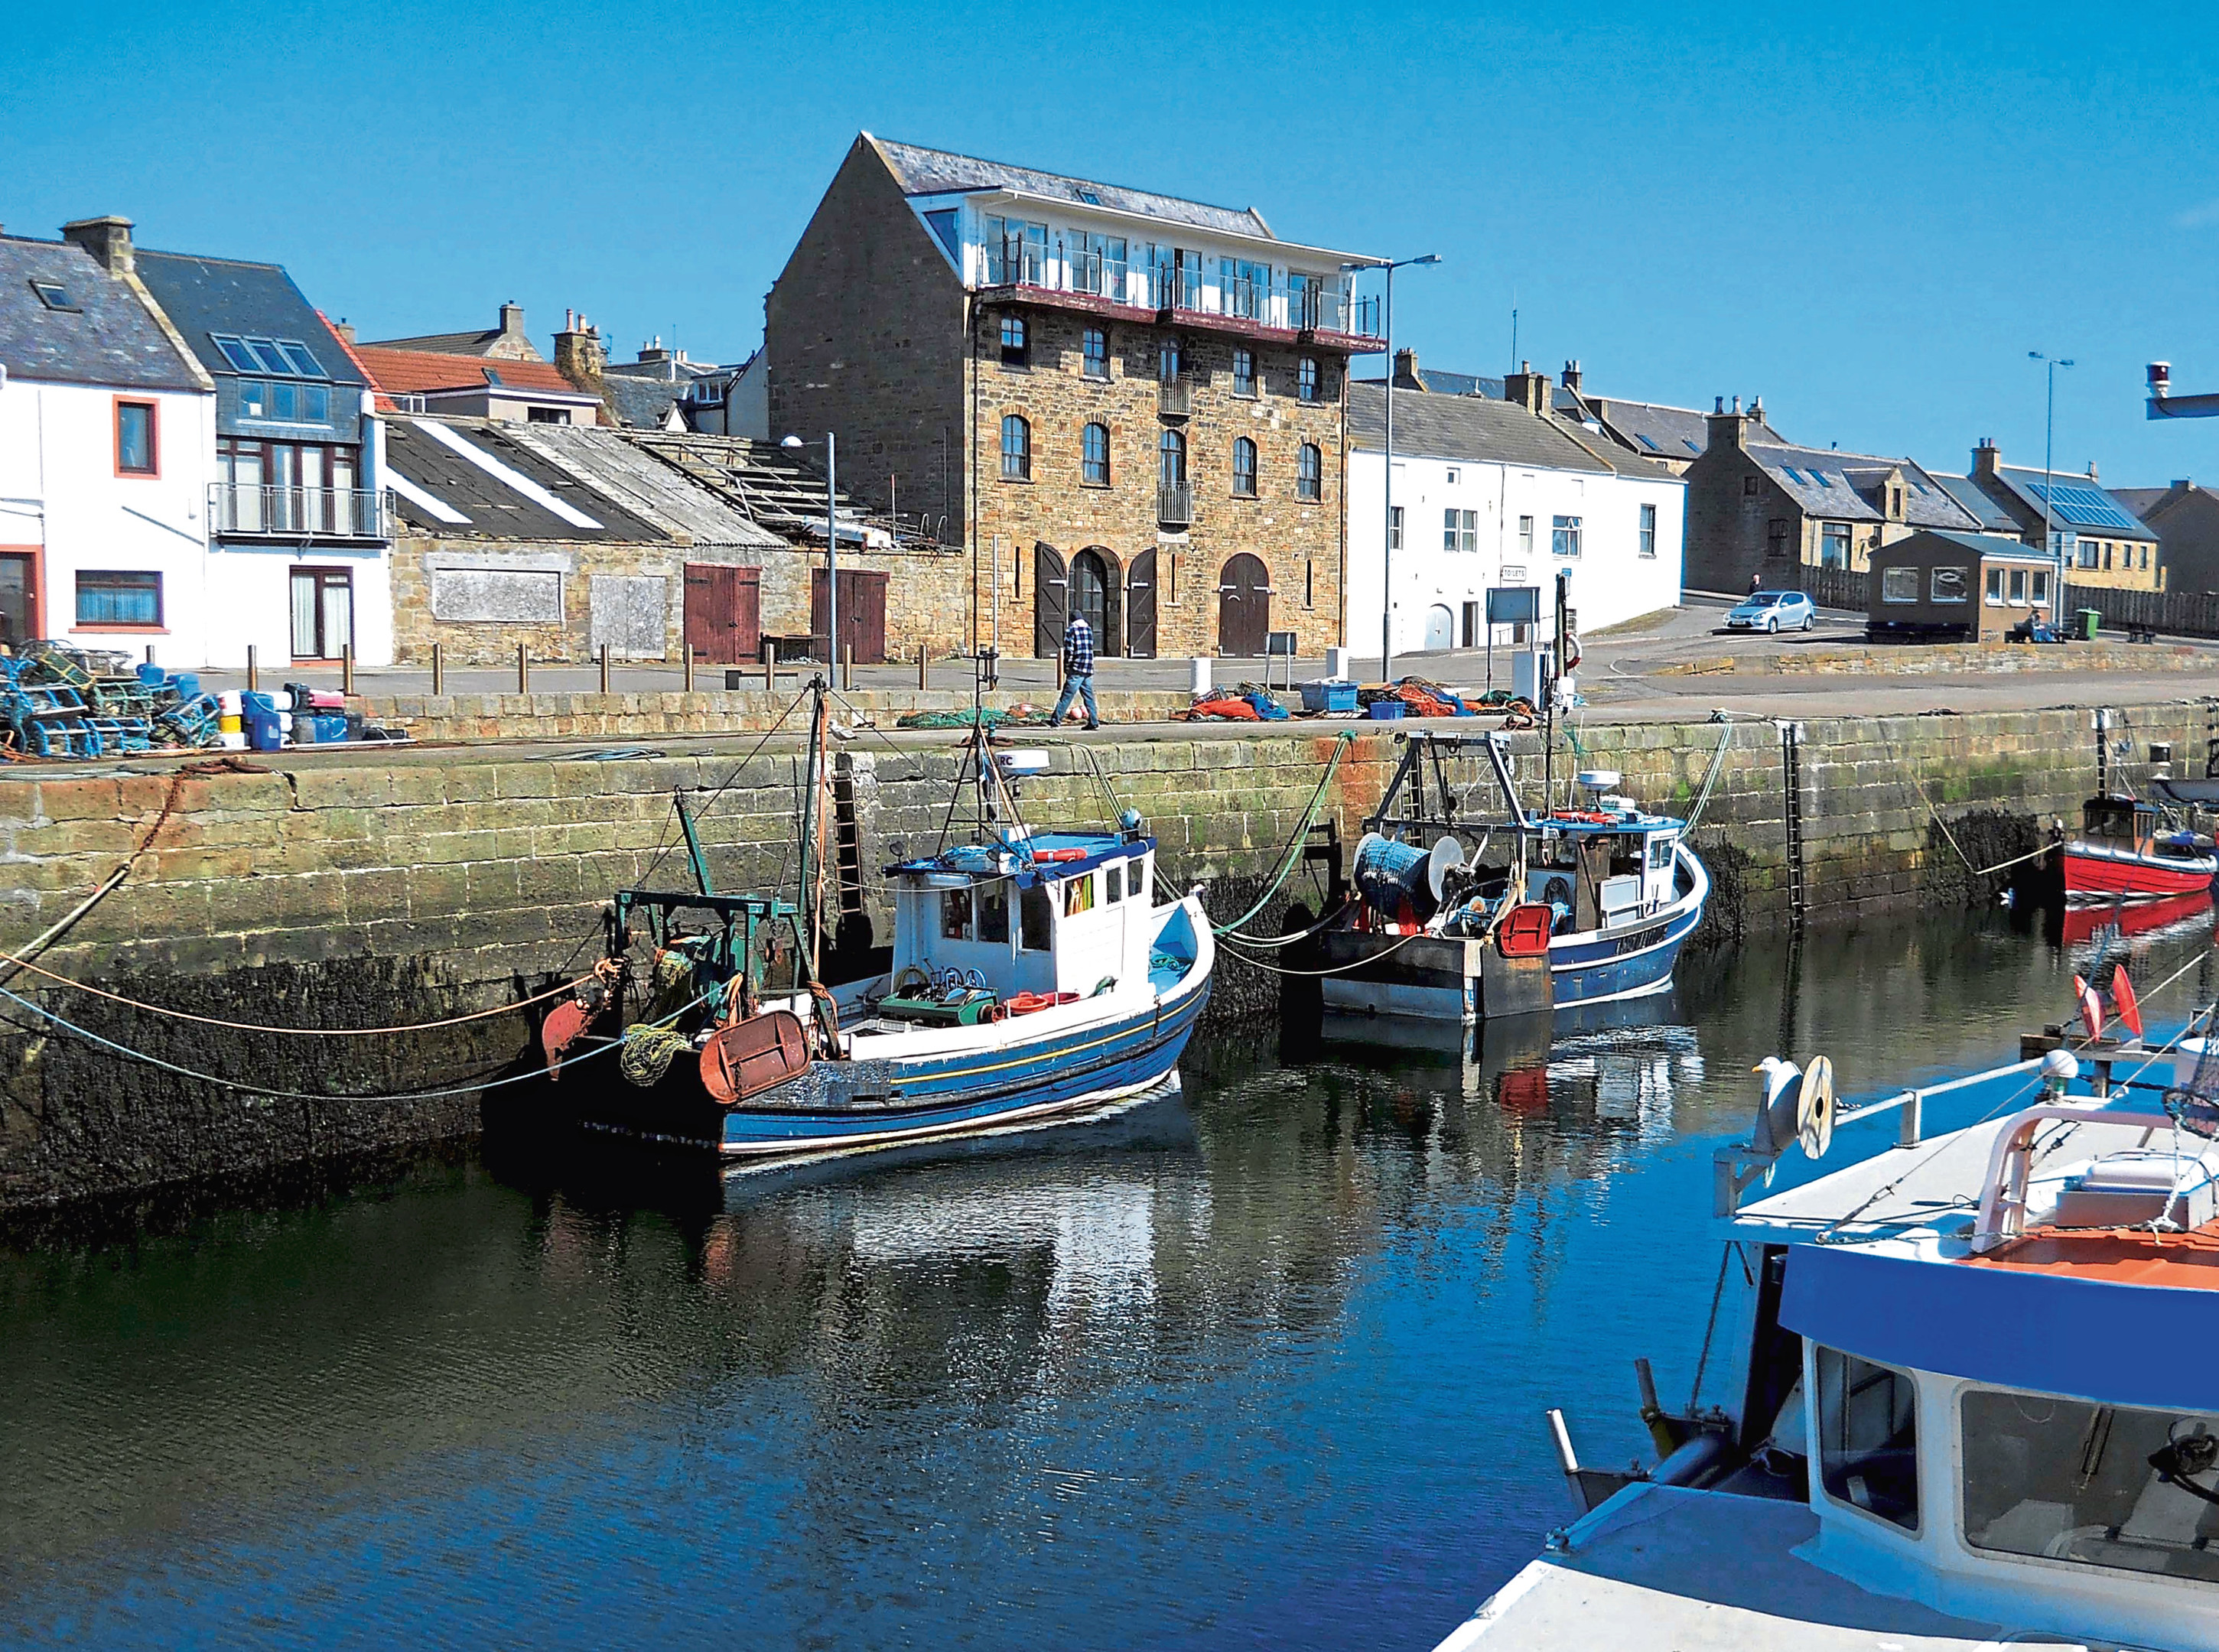 The attrative harbour in the village of Burghead near Lossiemouth on The Moray Firth on Scotland's North East Coast.